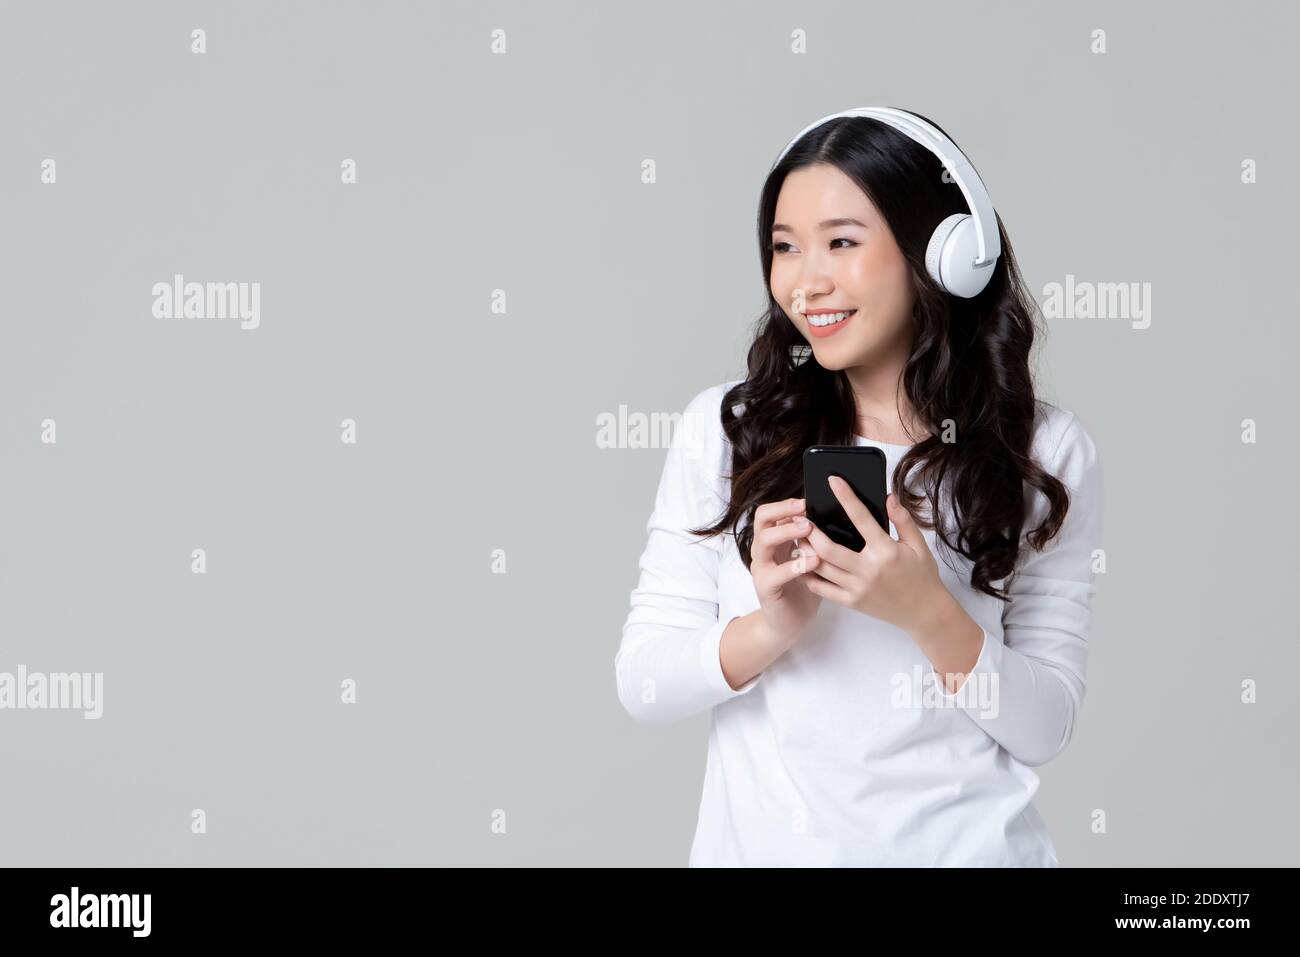 Asian woman in white t-shirt wearing wireless headphones listening to music from smartphone isolated on light gray background Stock Photo